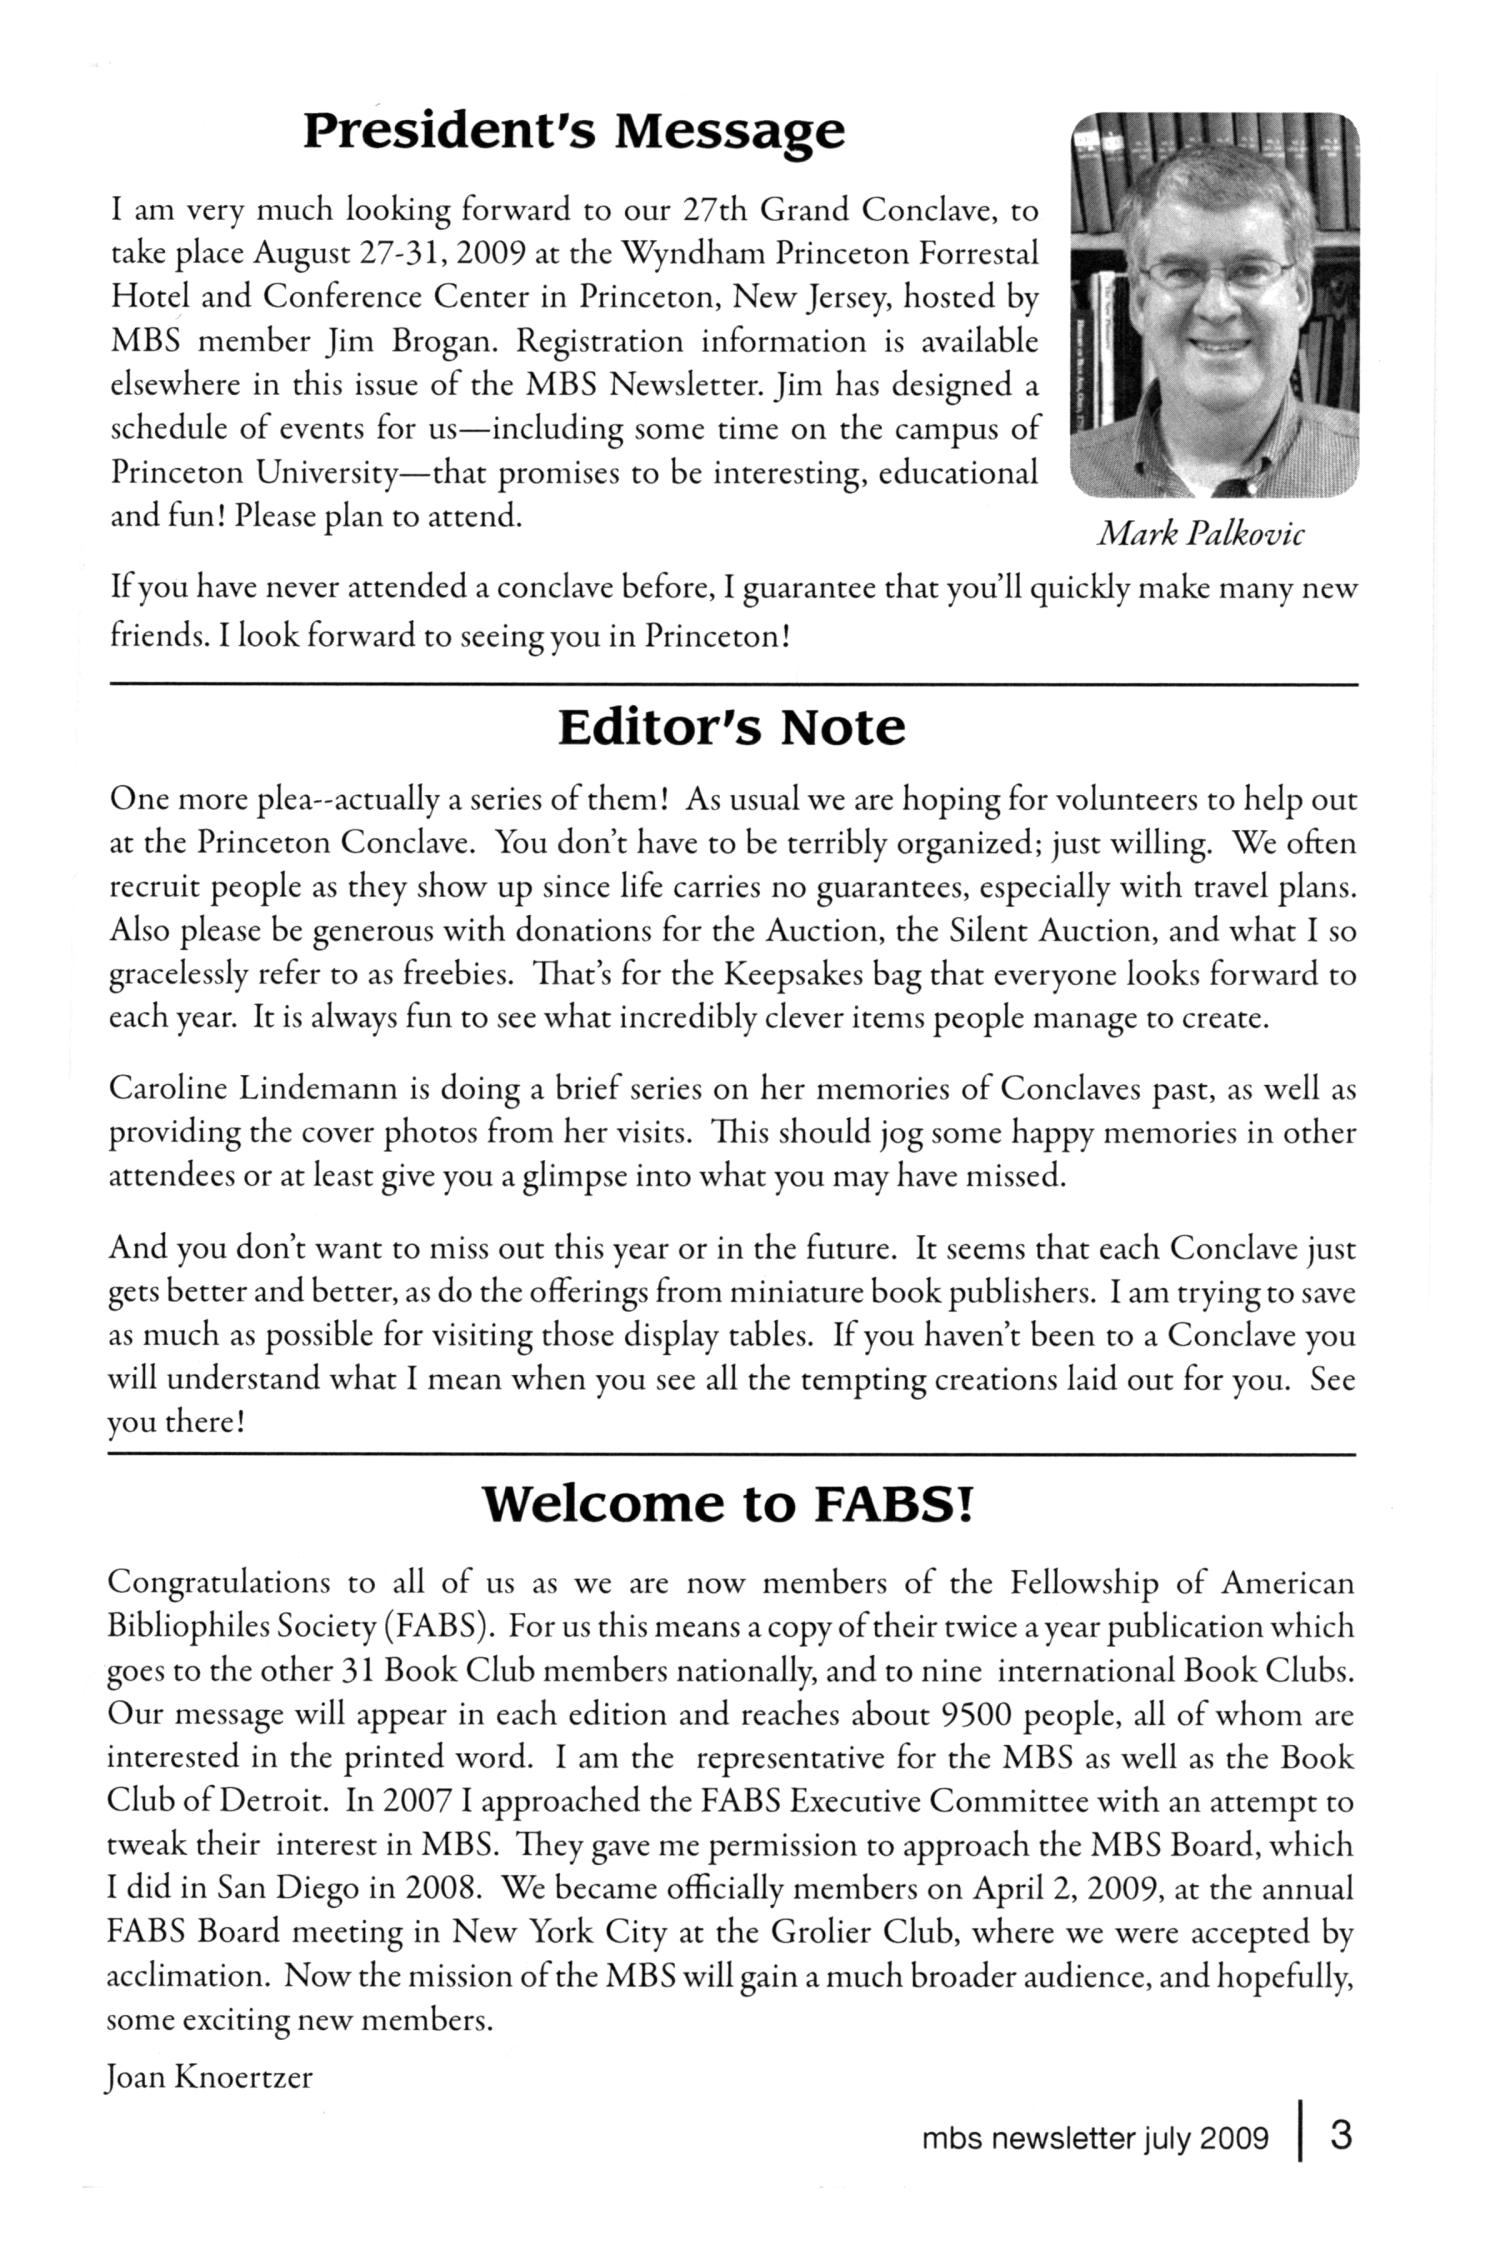 Miniature Book Society Newsletter, Number 81, July 2009
                                                
                                                    3
                                                